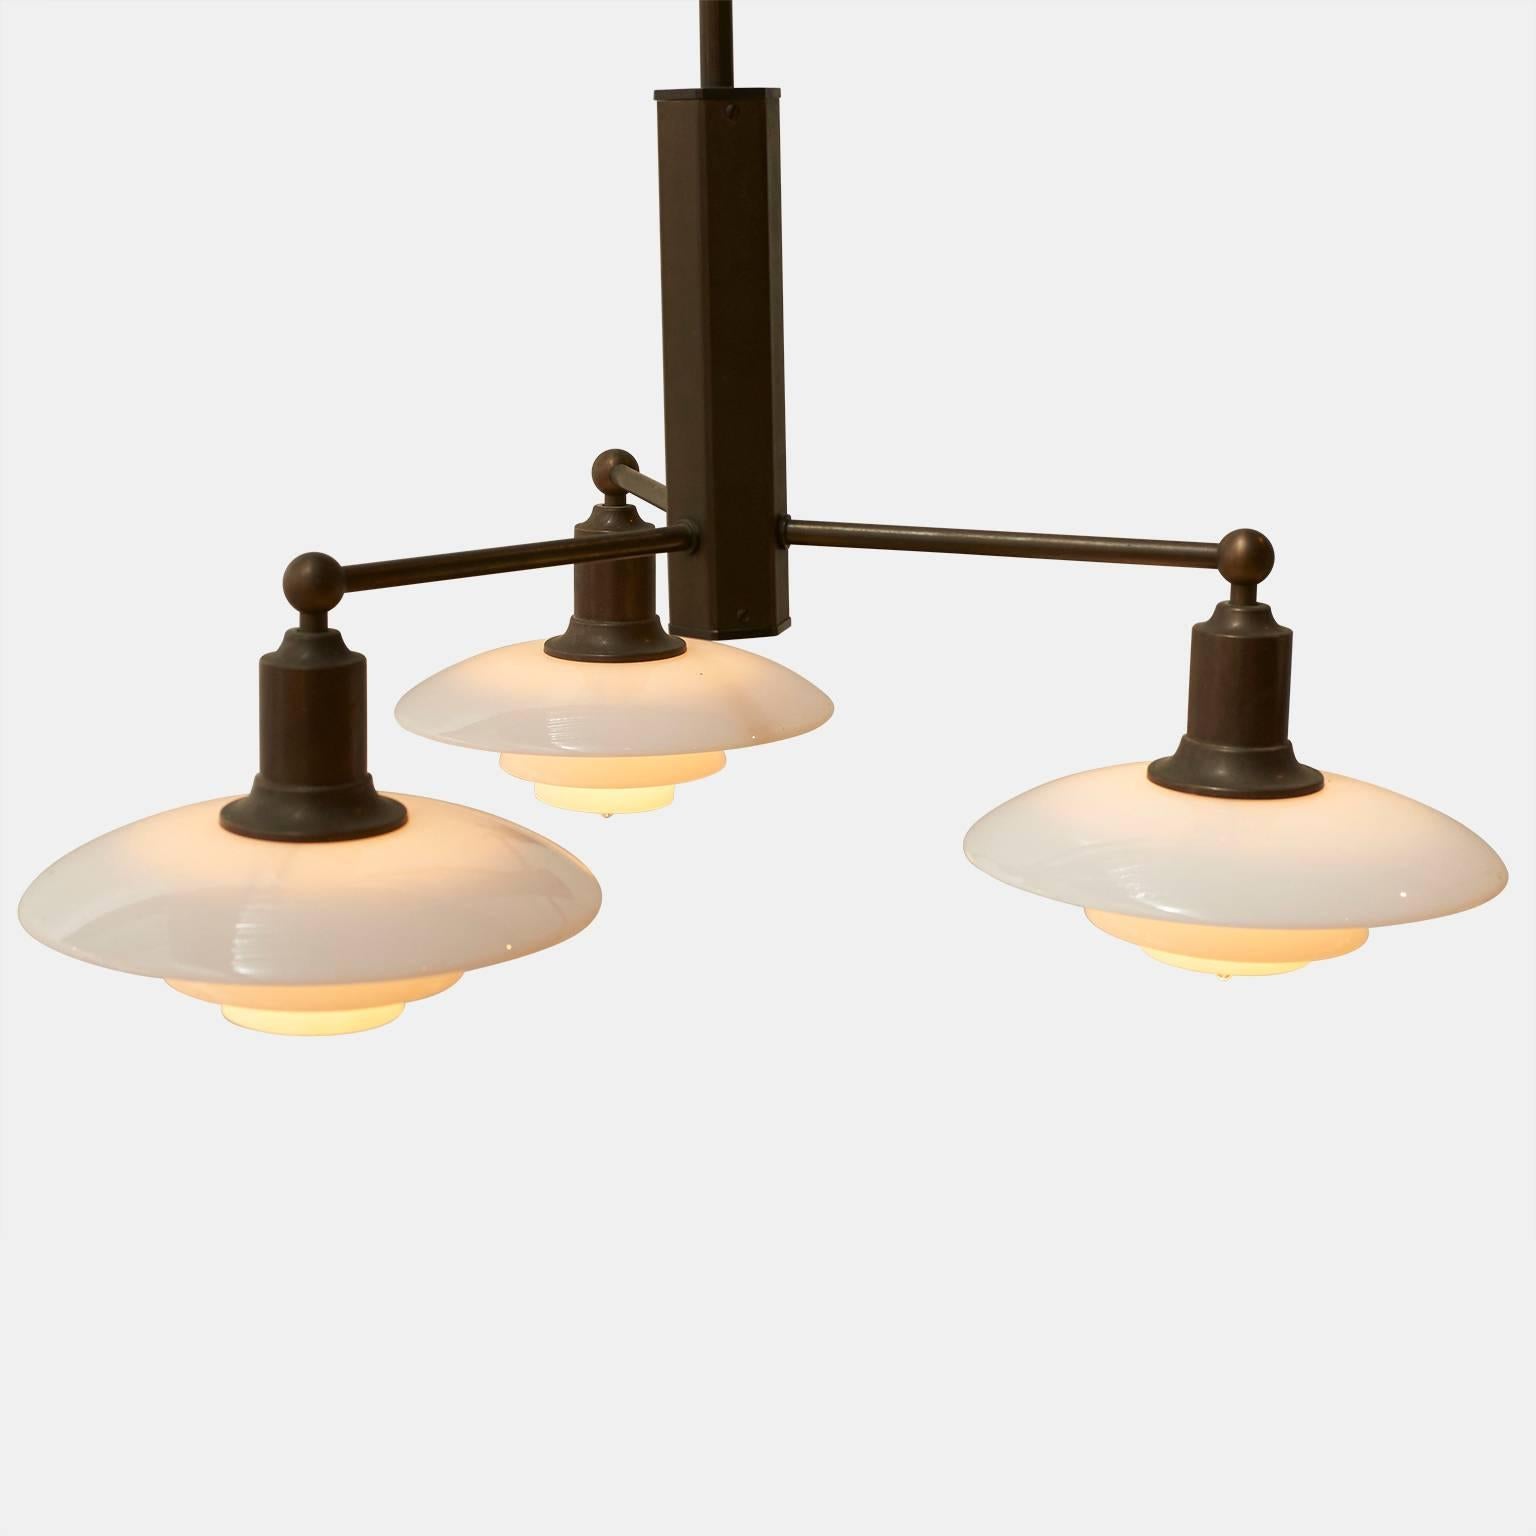 Danish Poul Henningsen Pair of Limited Edition Three-Arm Chandeliers For Sale